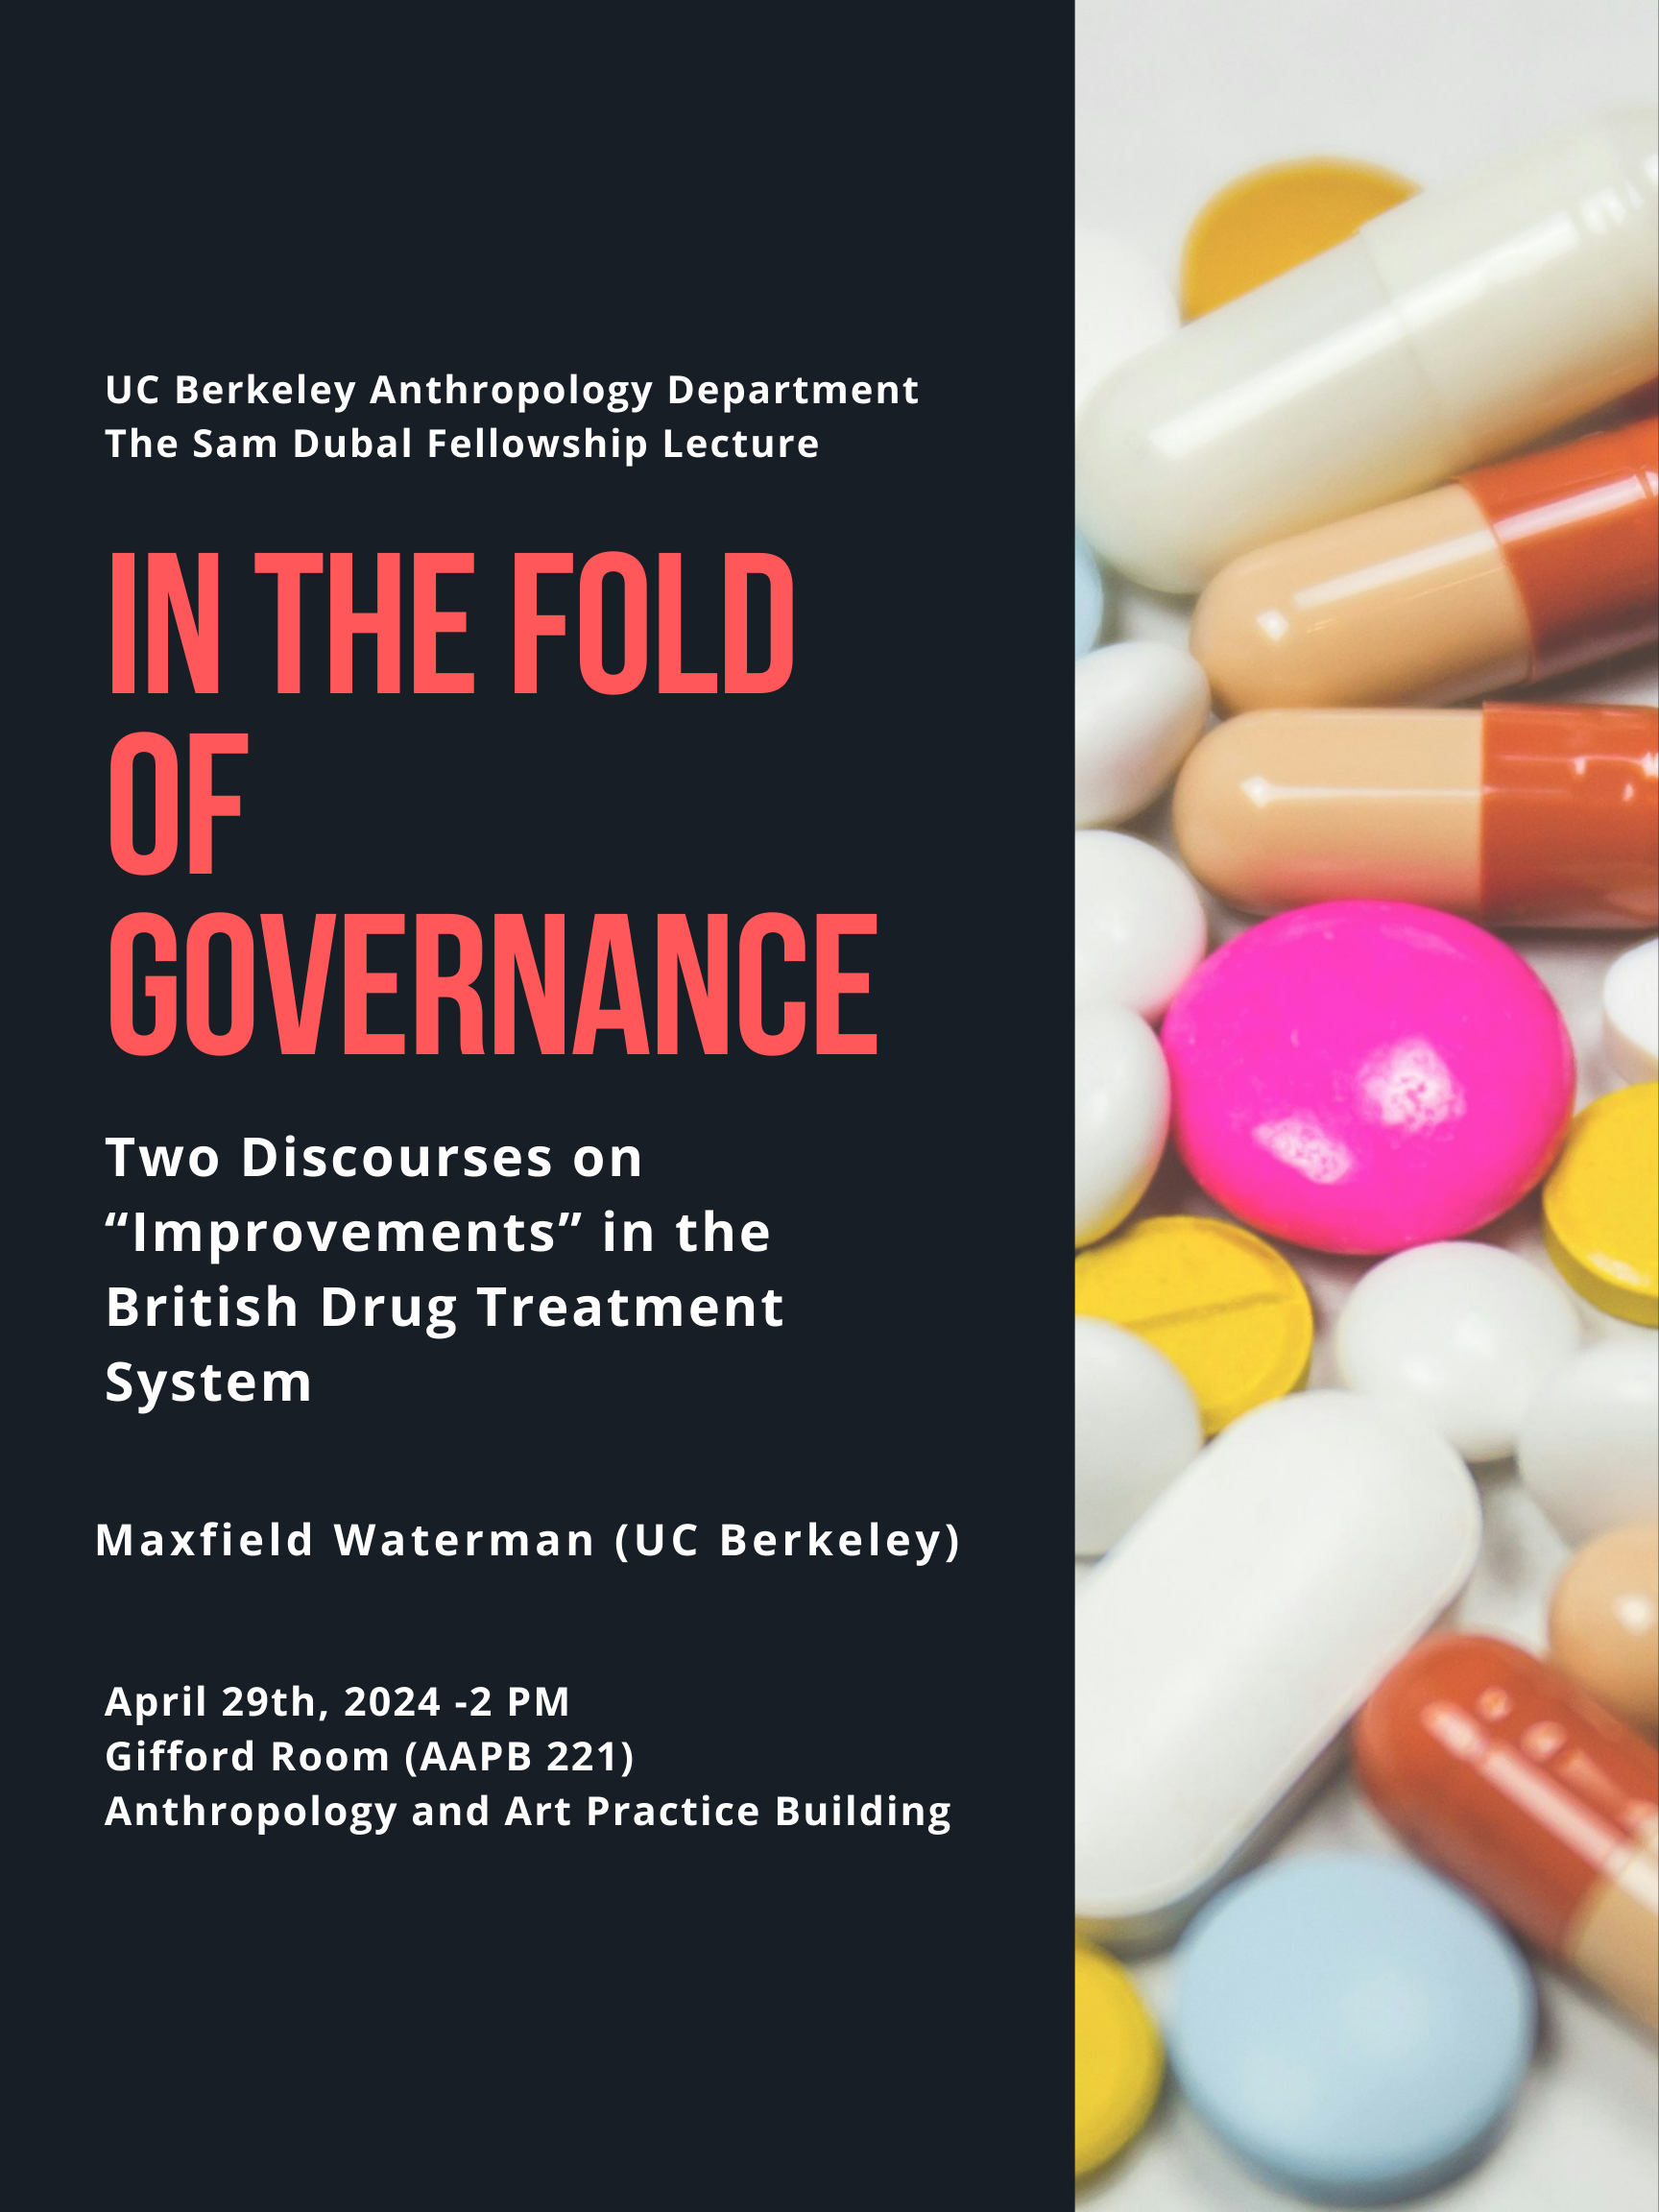  Two Discourses on “Improvement” in the British Drug Treatment System (Maxfield Waterman)